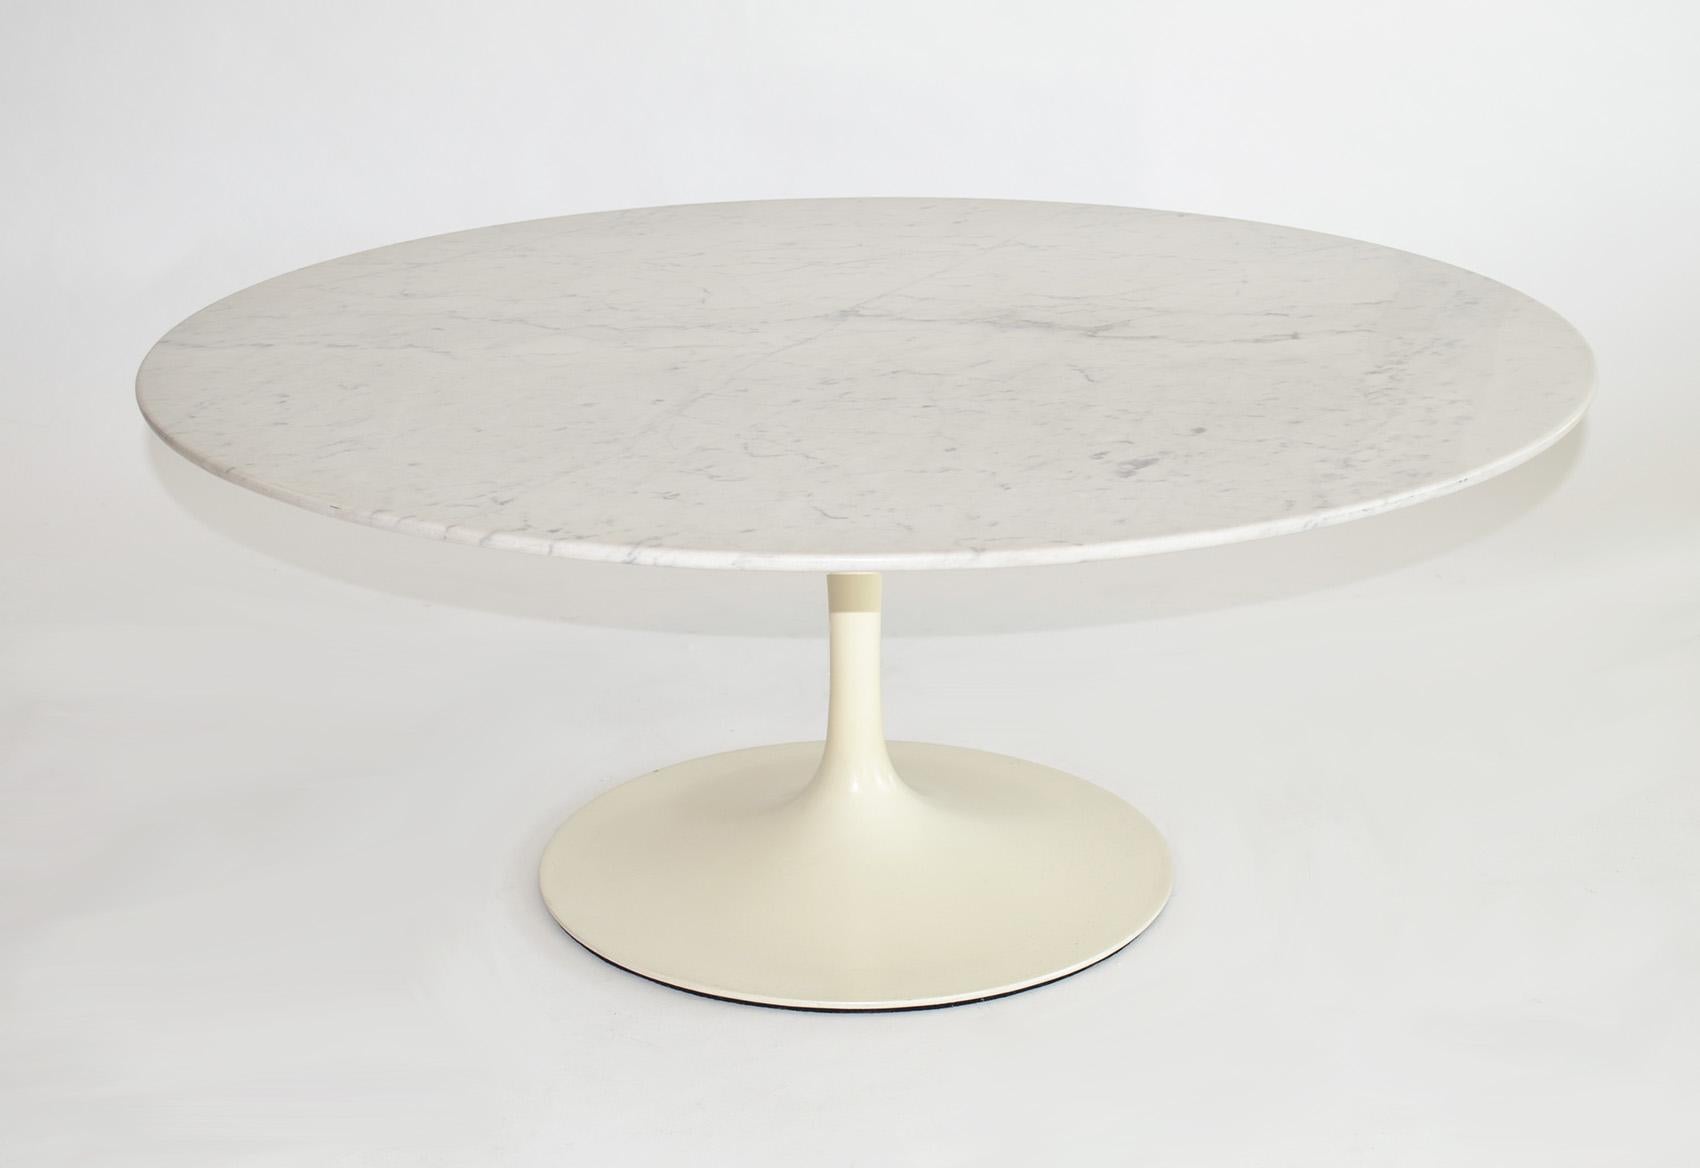 Early white marble top Tulip coffee table by Saarinen for Knoll 1960s 
Original condition, 1966 production pedestal cocktail table with circular white Italian marble top with gray veins. See original receipt. Mid-Century Modern, USA.